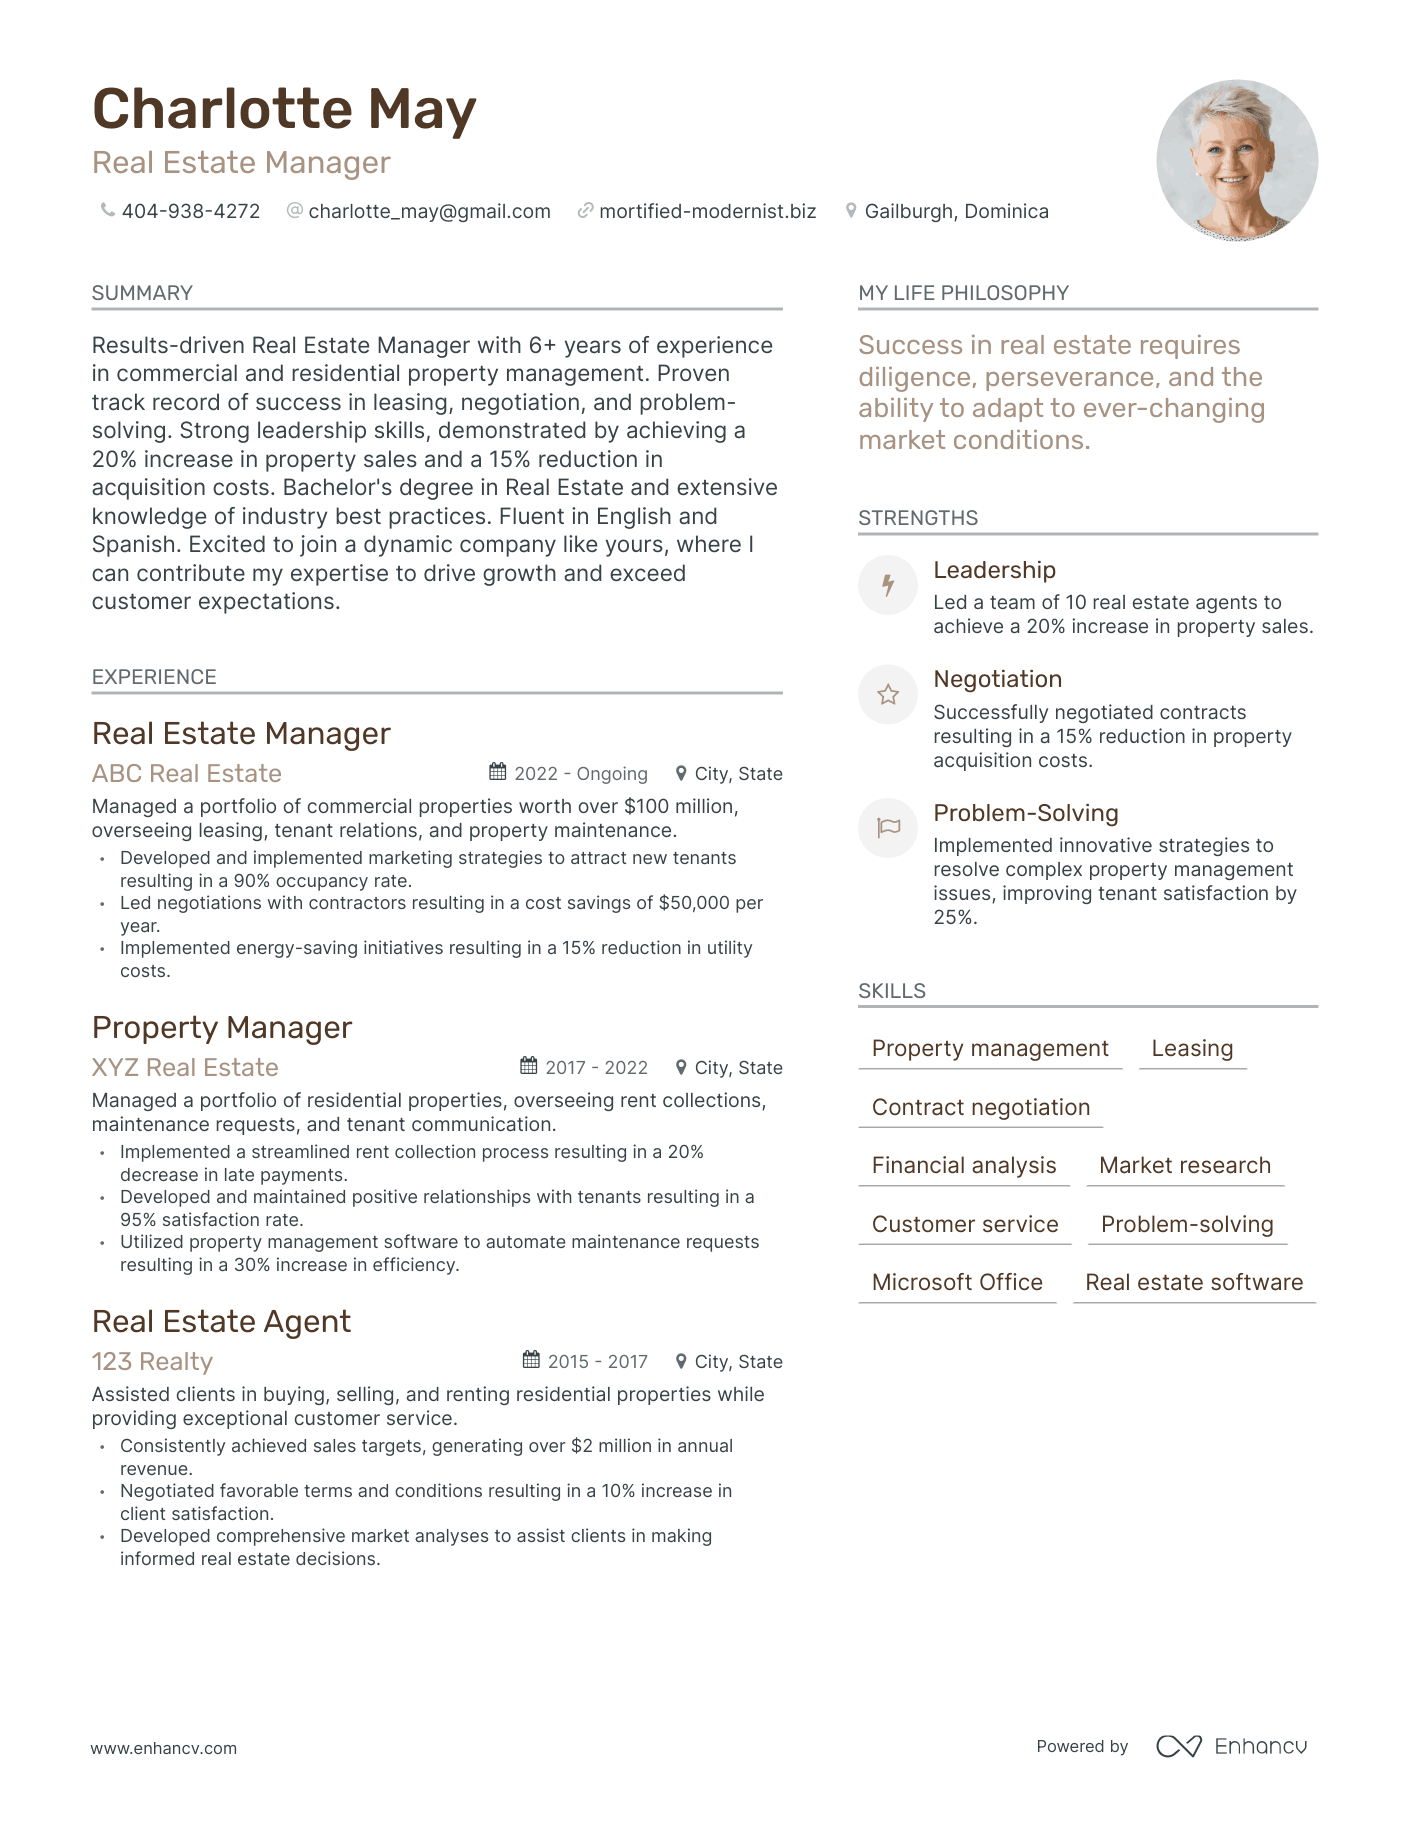 Real Estate Manager resume example